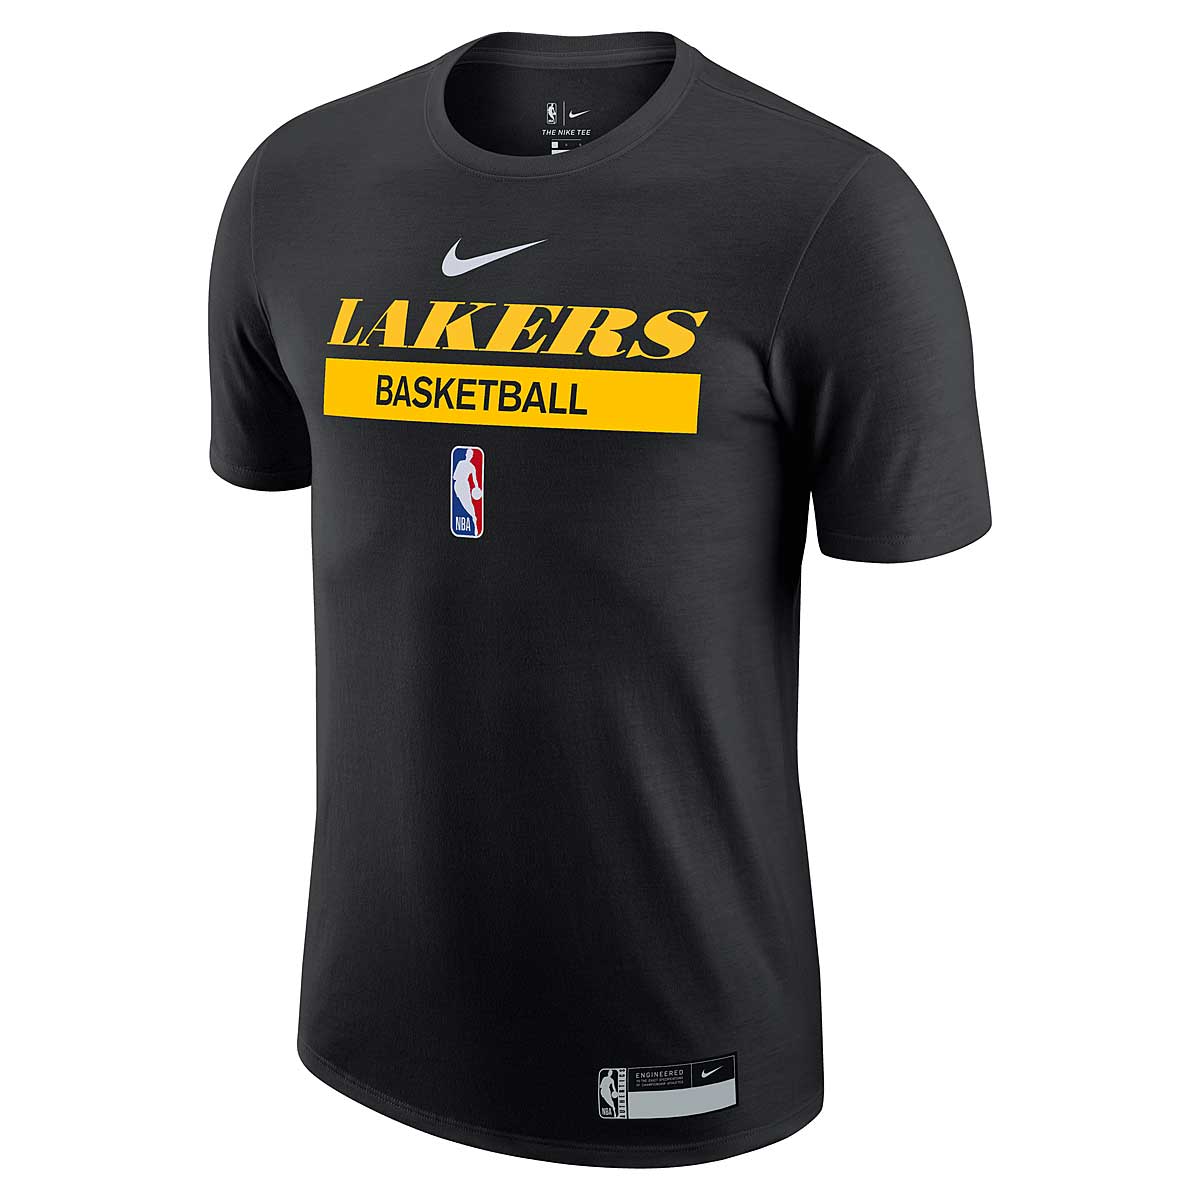 Buy NBA LOS ANGELES LAKERS DRI-FIT PRACTICE T-SHIRT for N/A 0.0 on ...